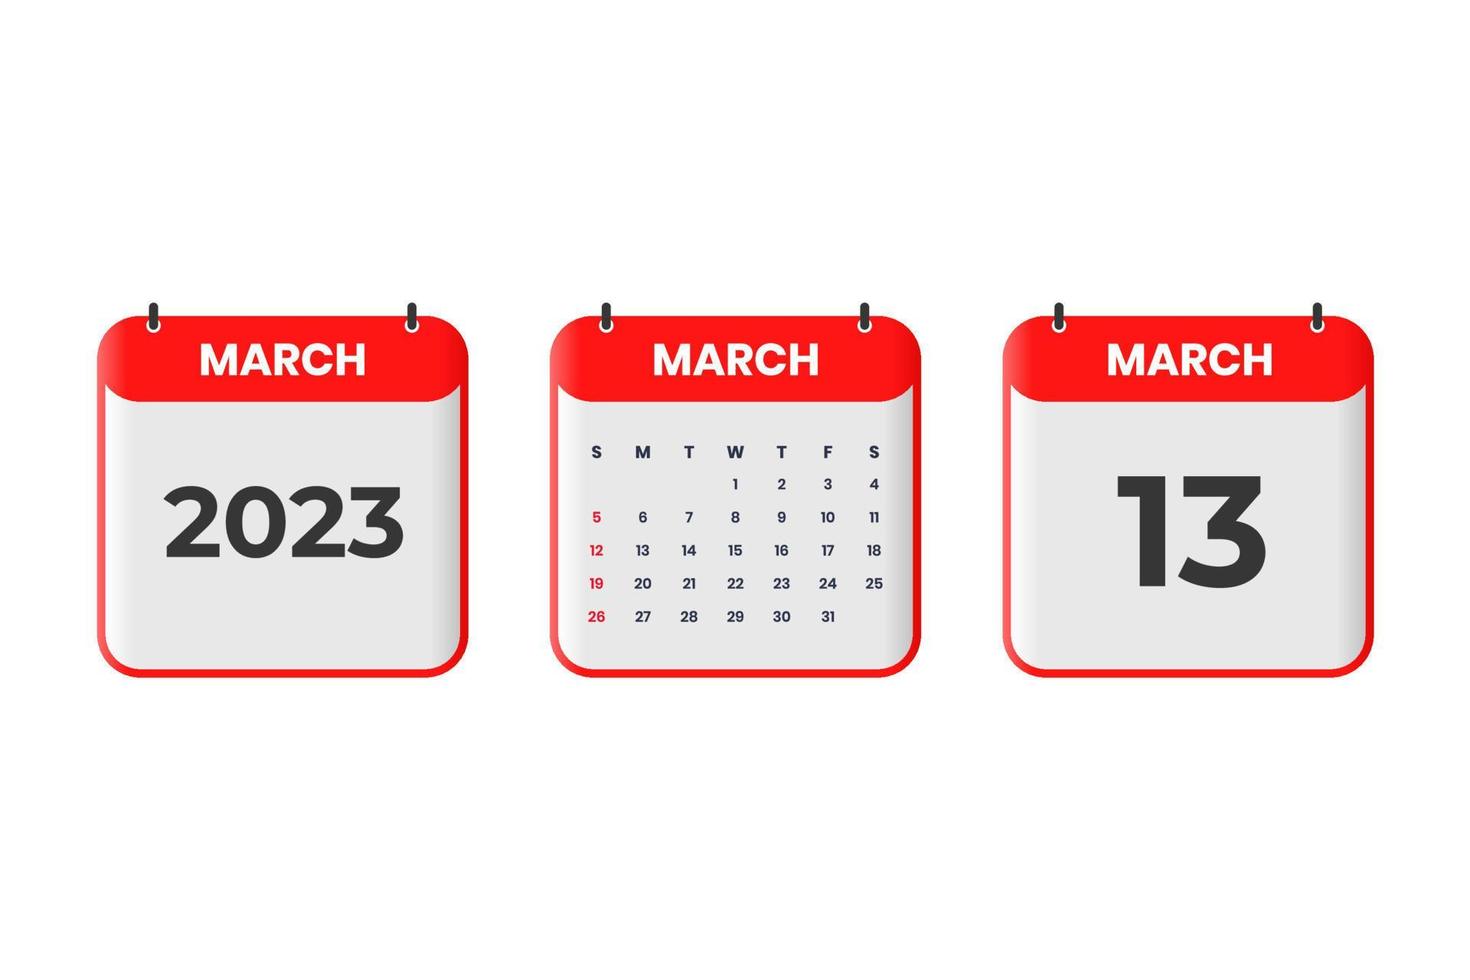 March 2023 calendar design. 13th March 2023 calendar icon for schedule, appointment, important date concept vector